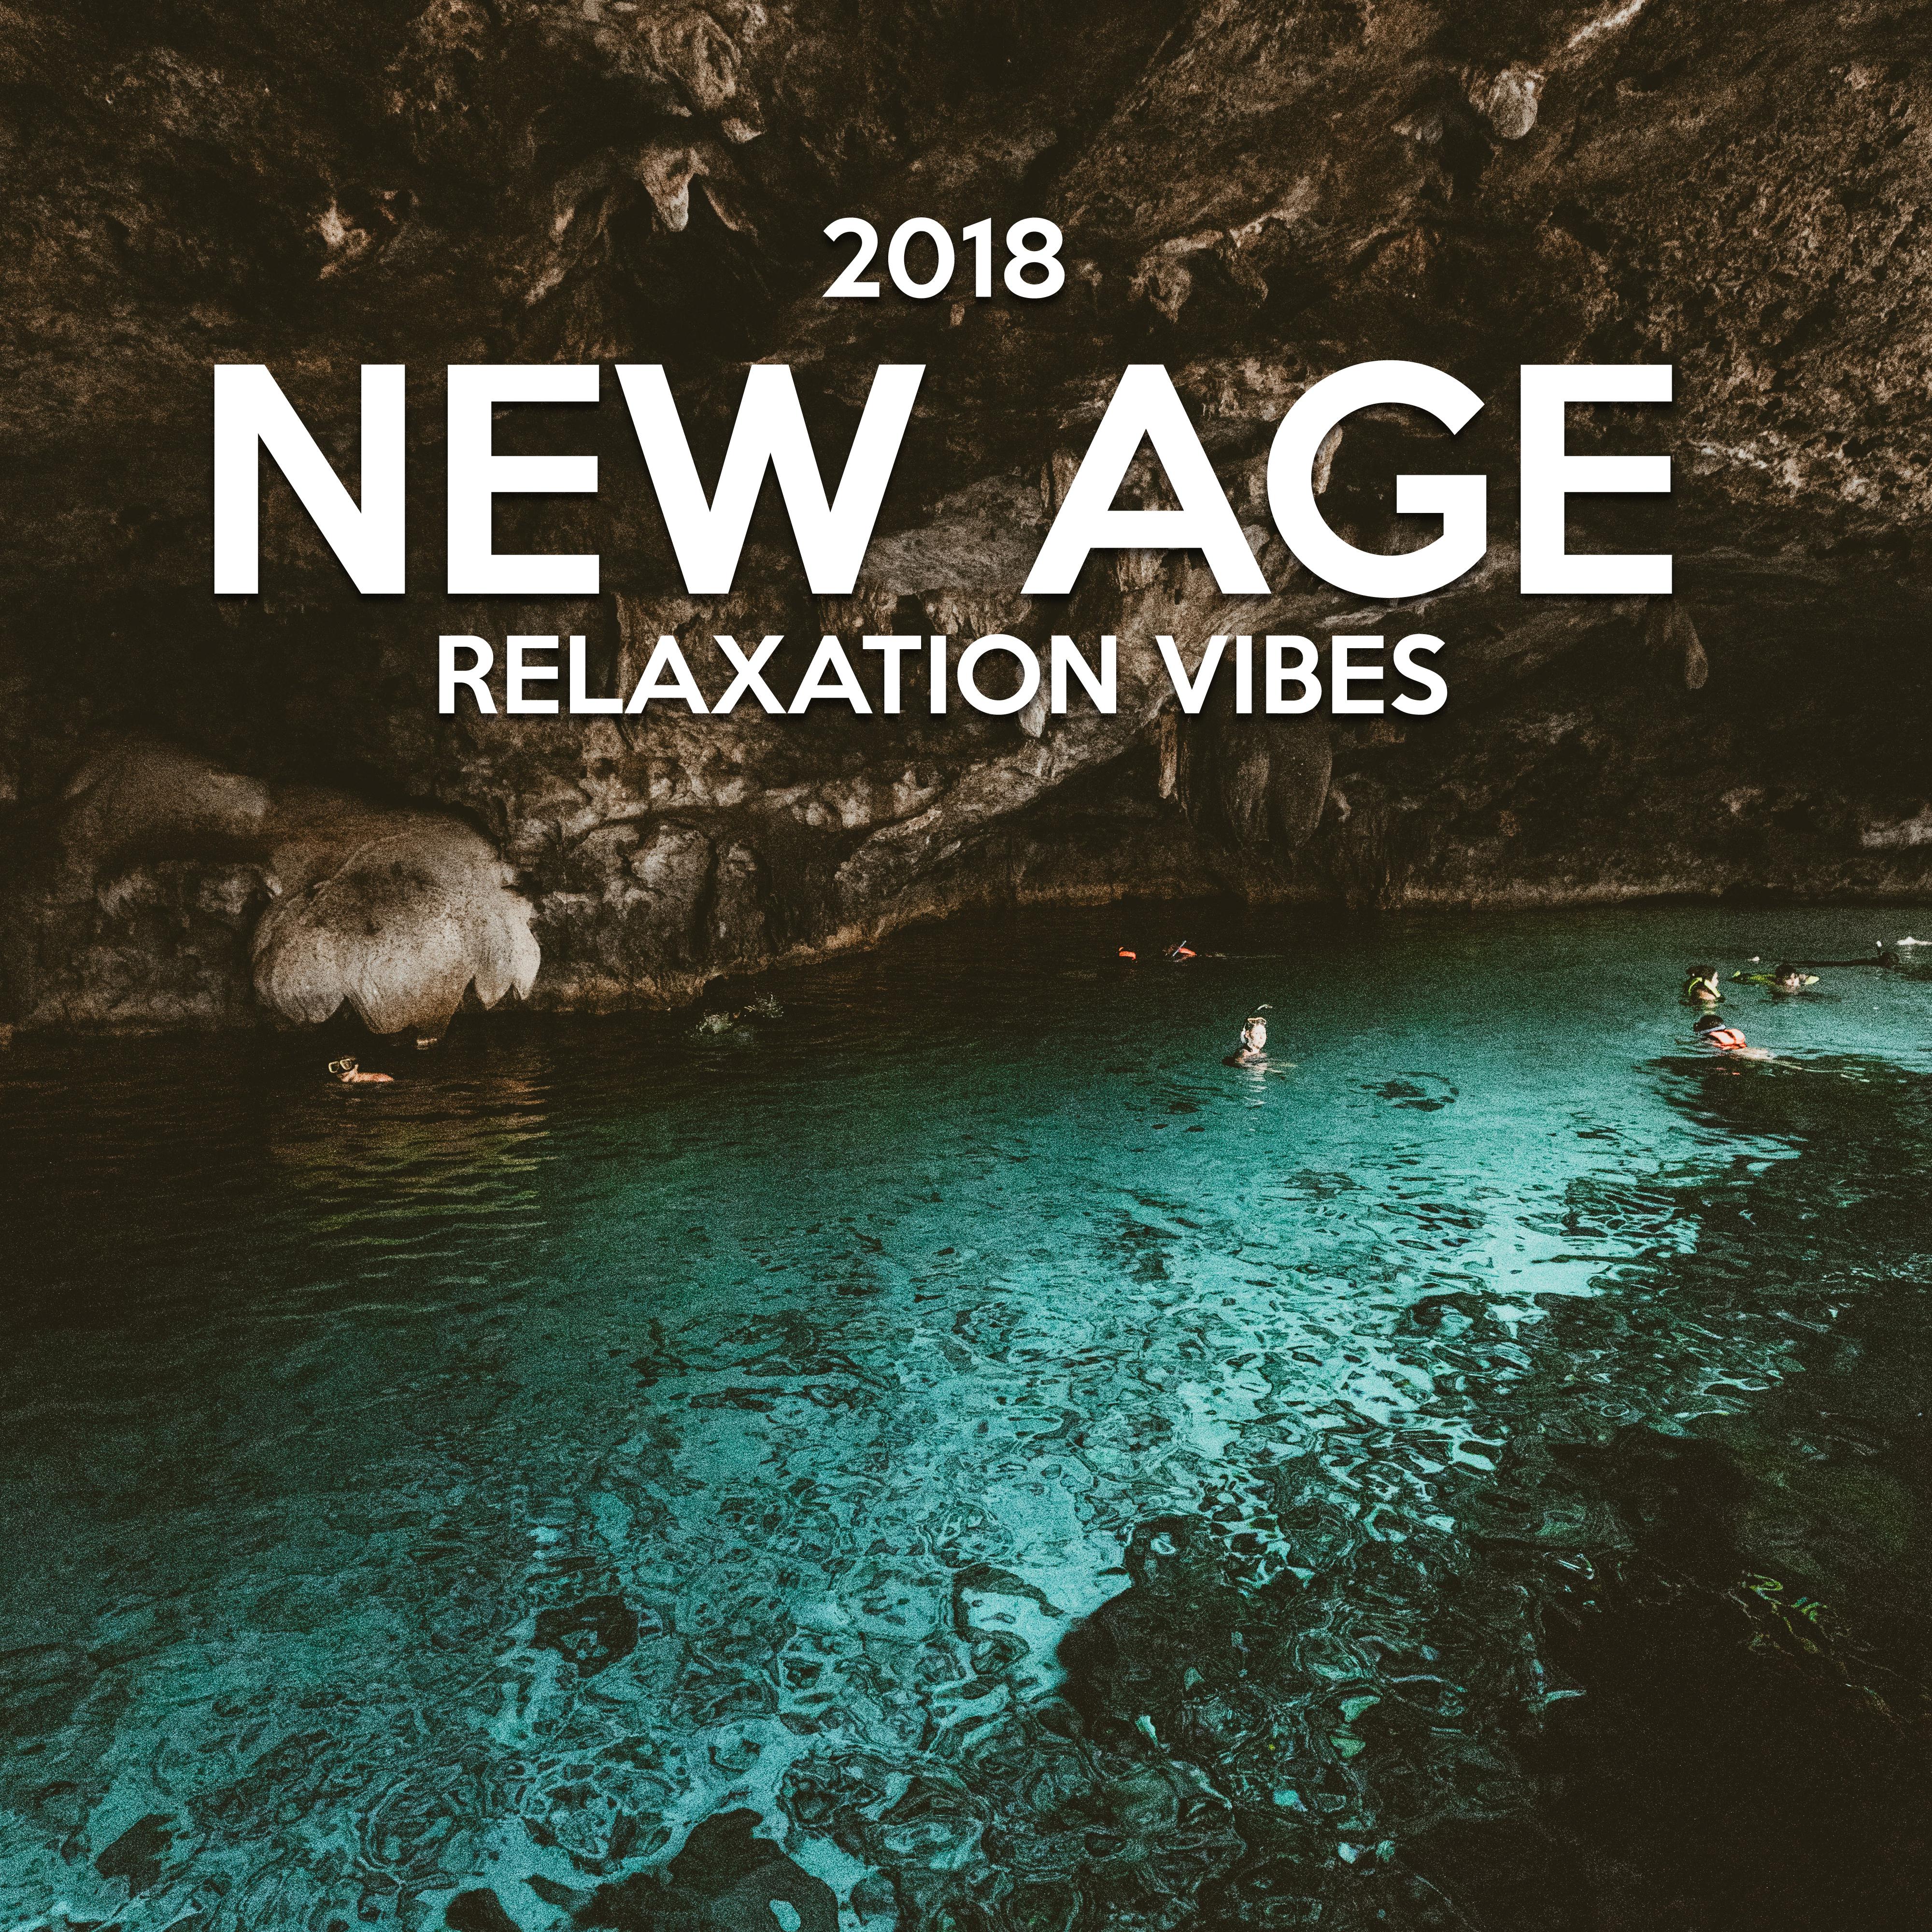 2018 New Age Relaxation Vibes